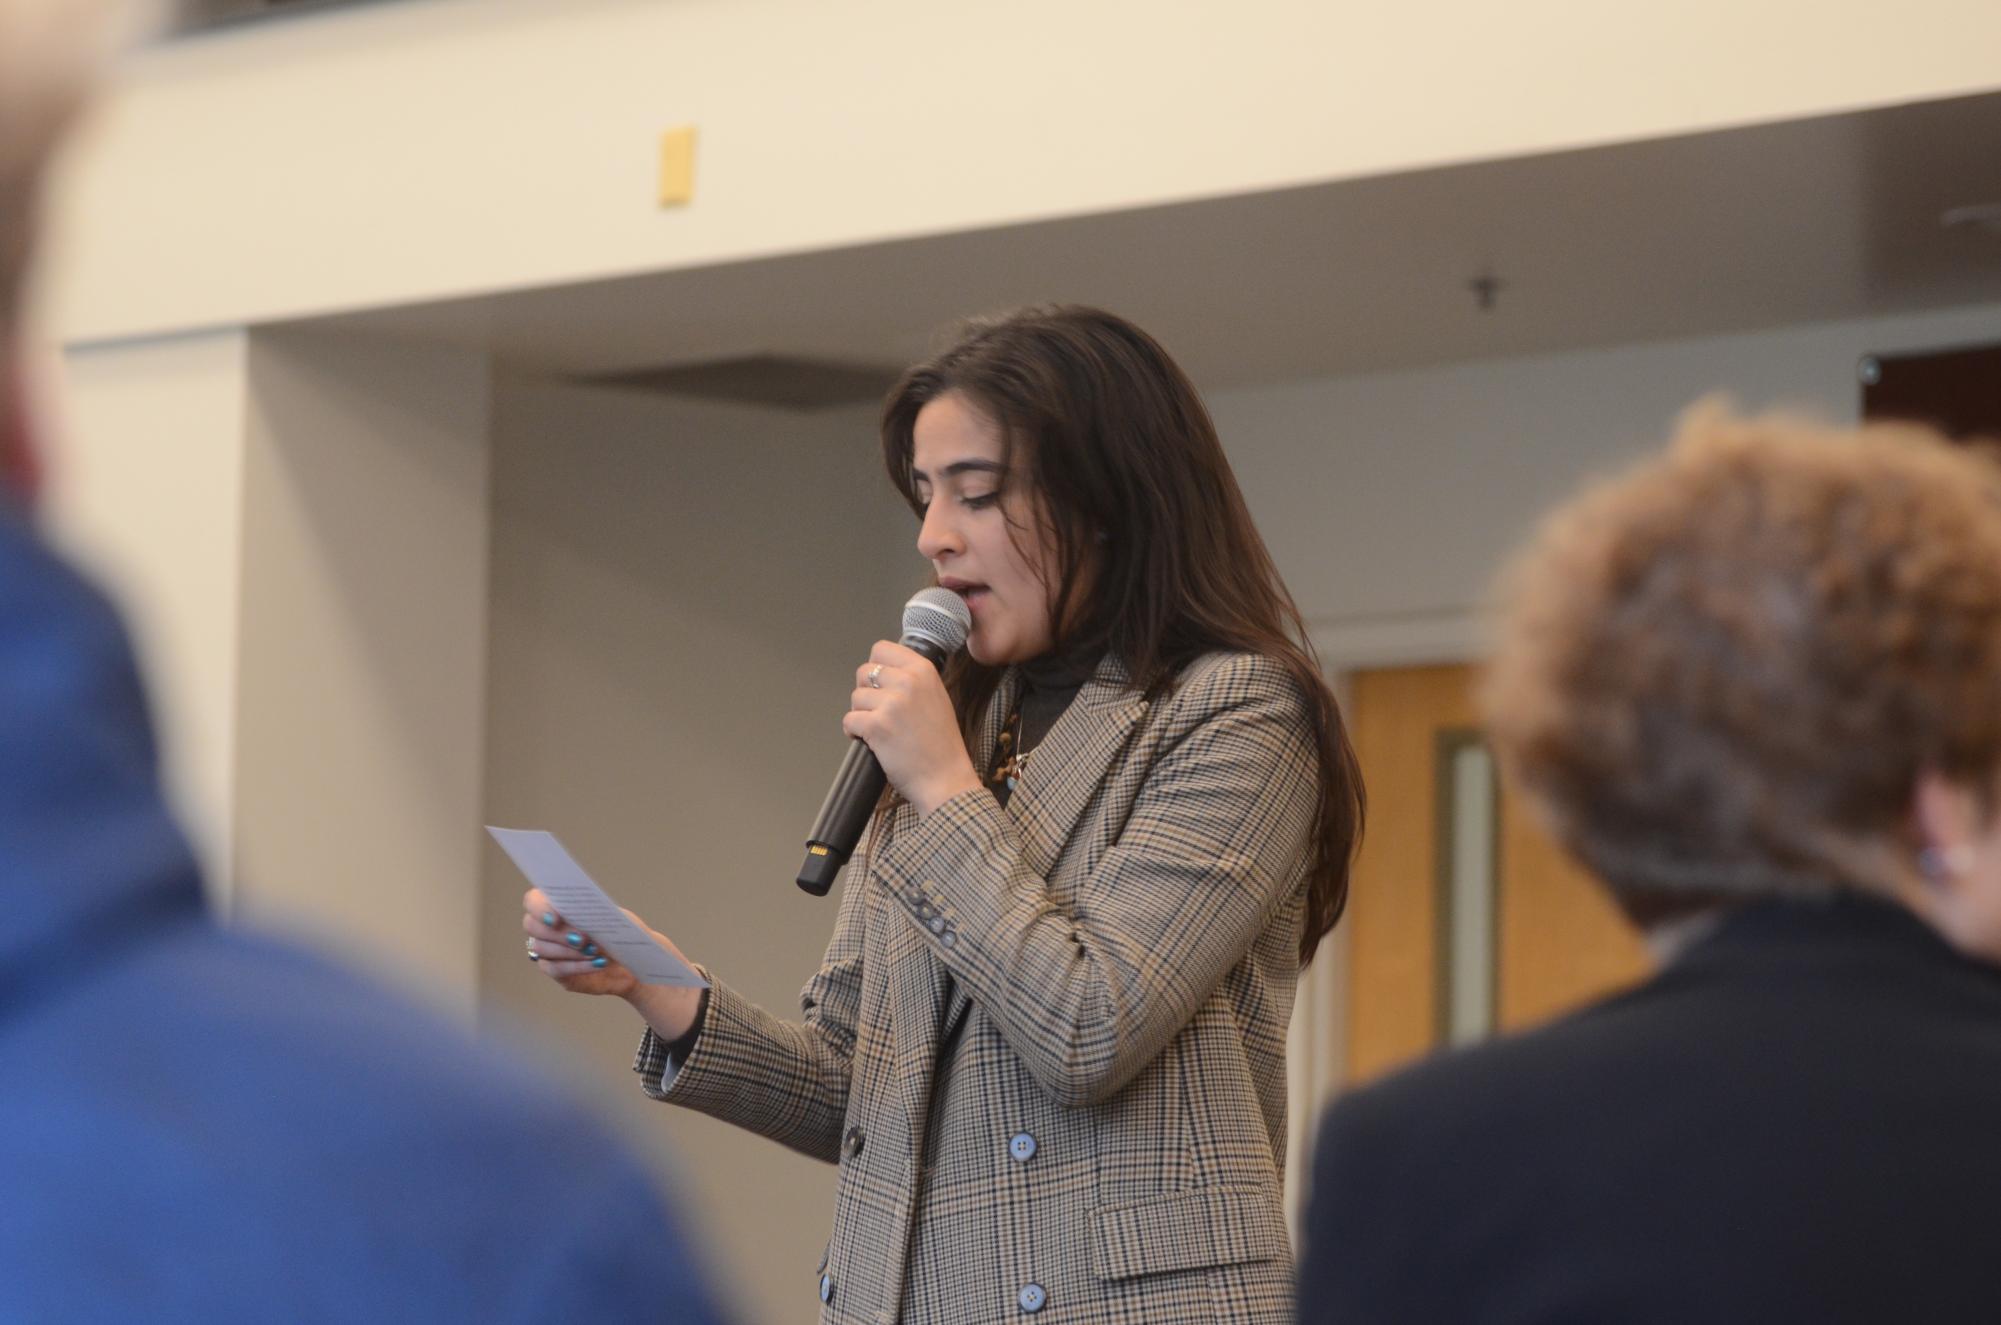 ATTENTIVE SPEAKING. Mayorga details the basis of attention economy. “I see it as an economic system that relies on extracting our attention to turn it into a commodity so that way, advertisers can make money off of selling us things,” she said.